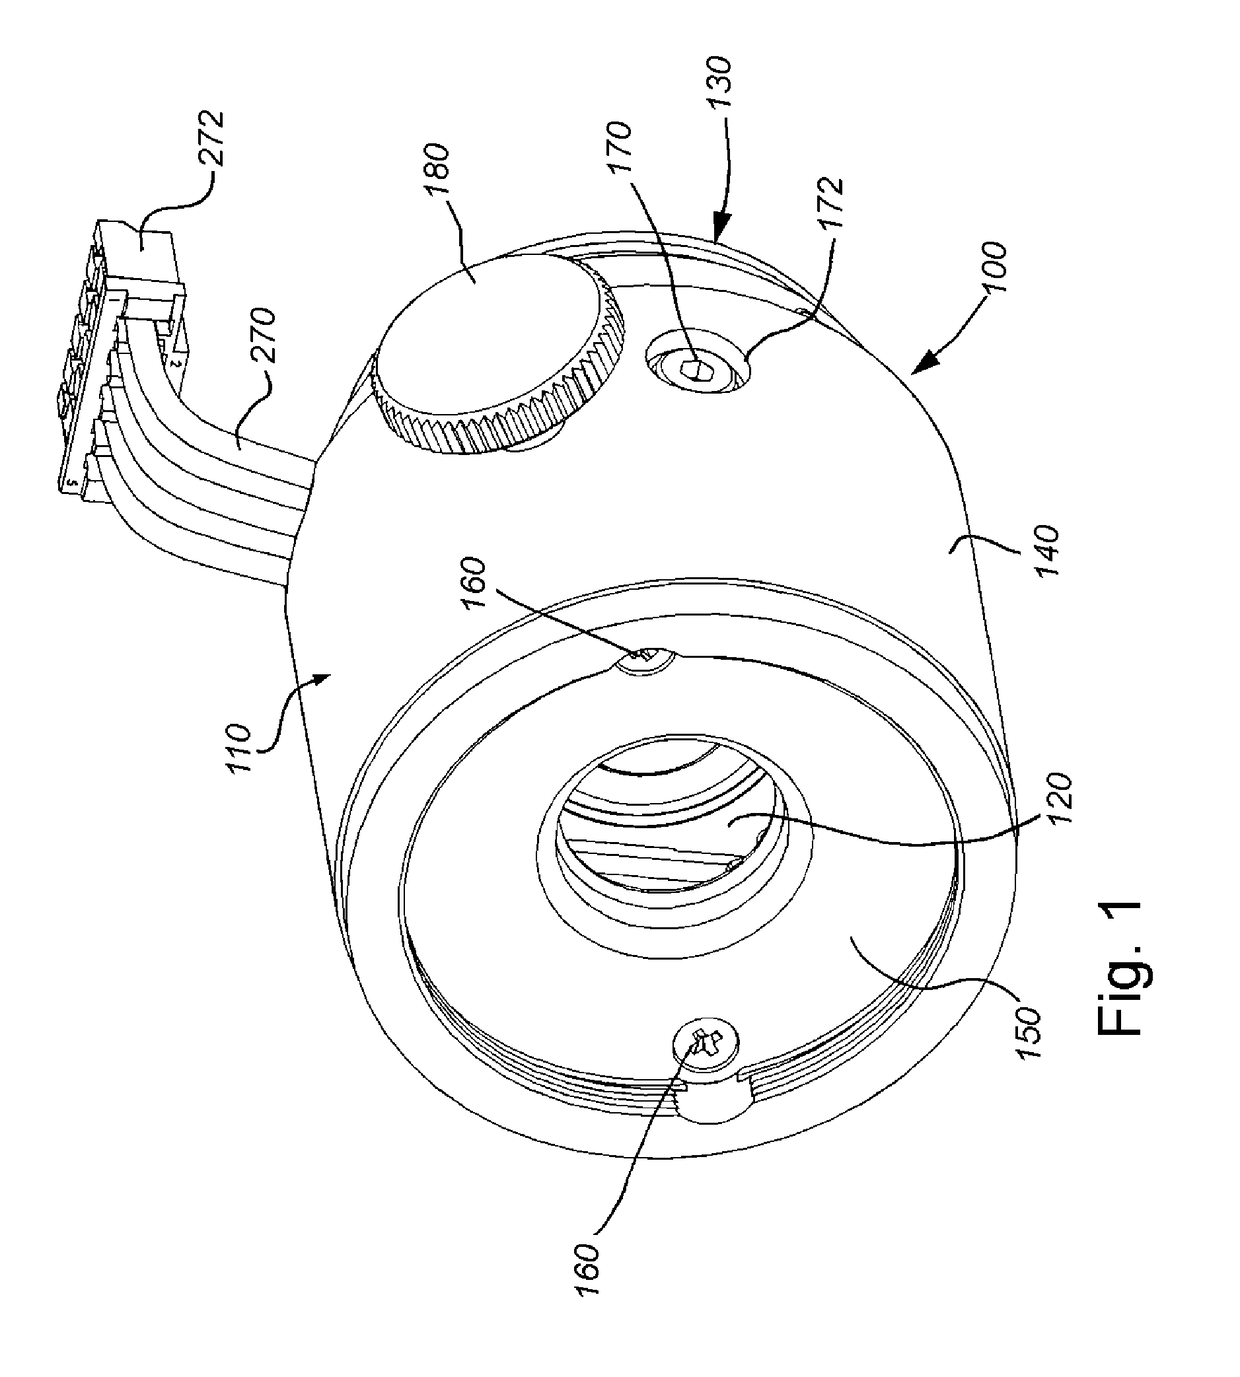 Lens assembly with integrated feedback loop and time-of-flight sensor